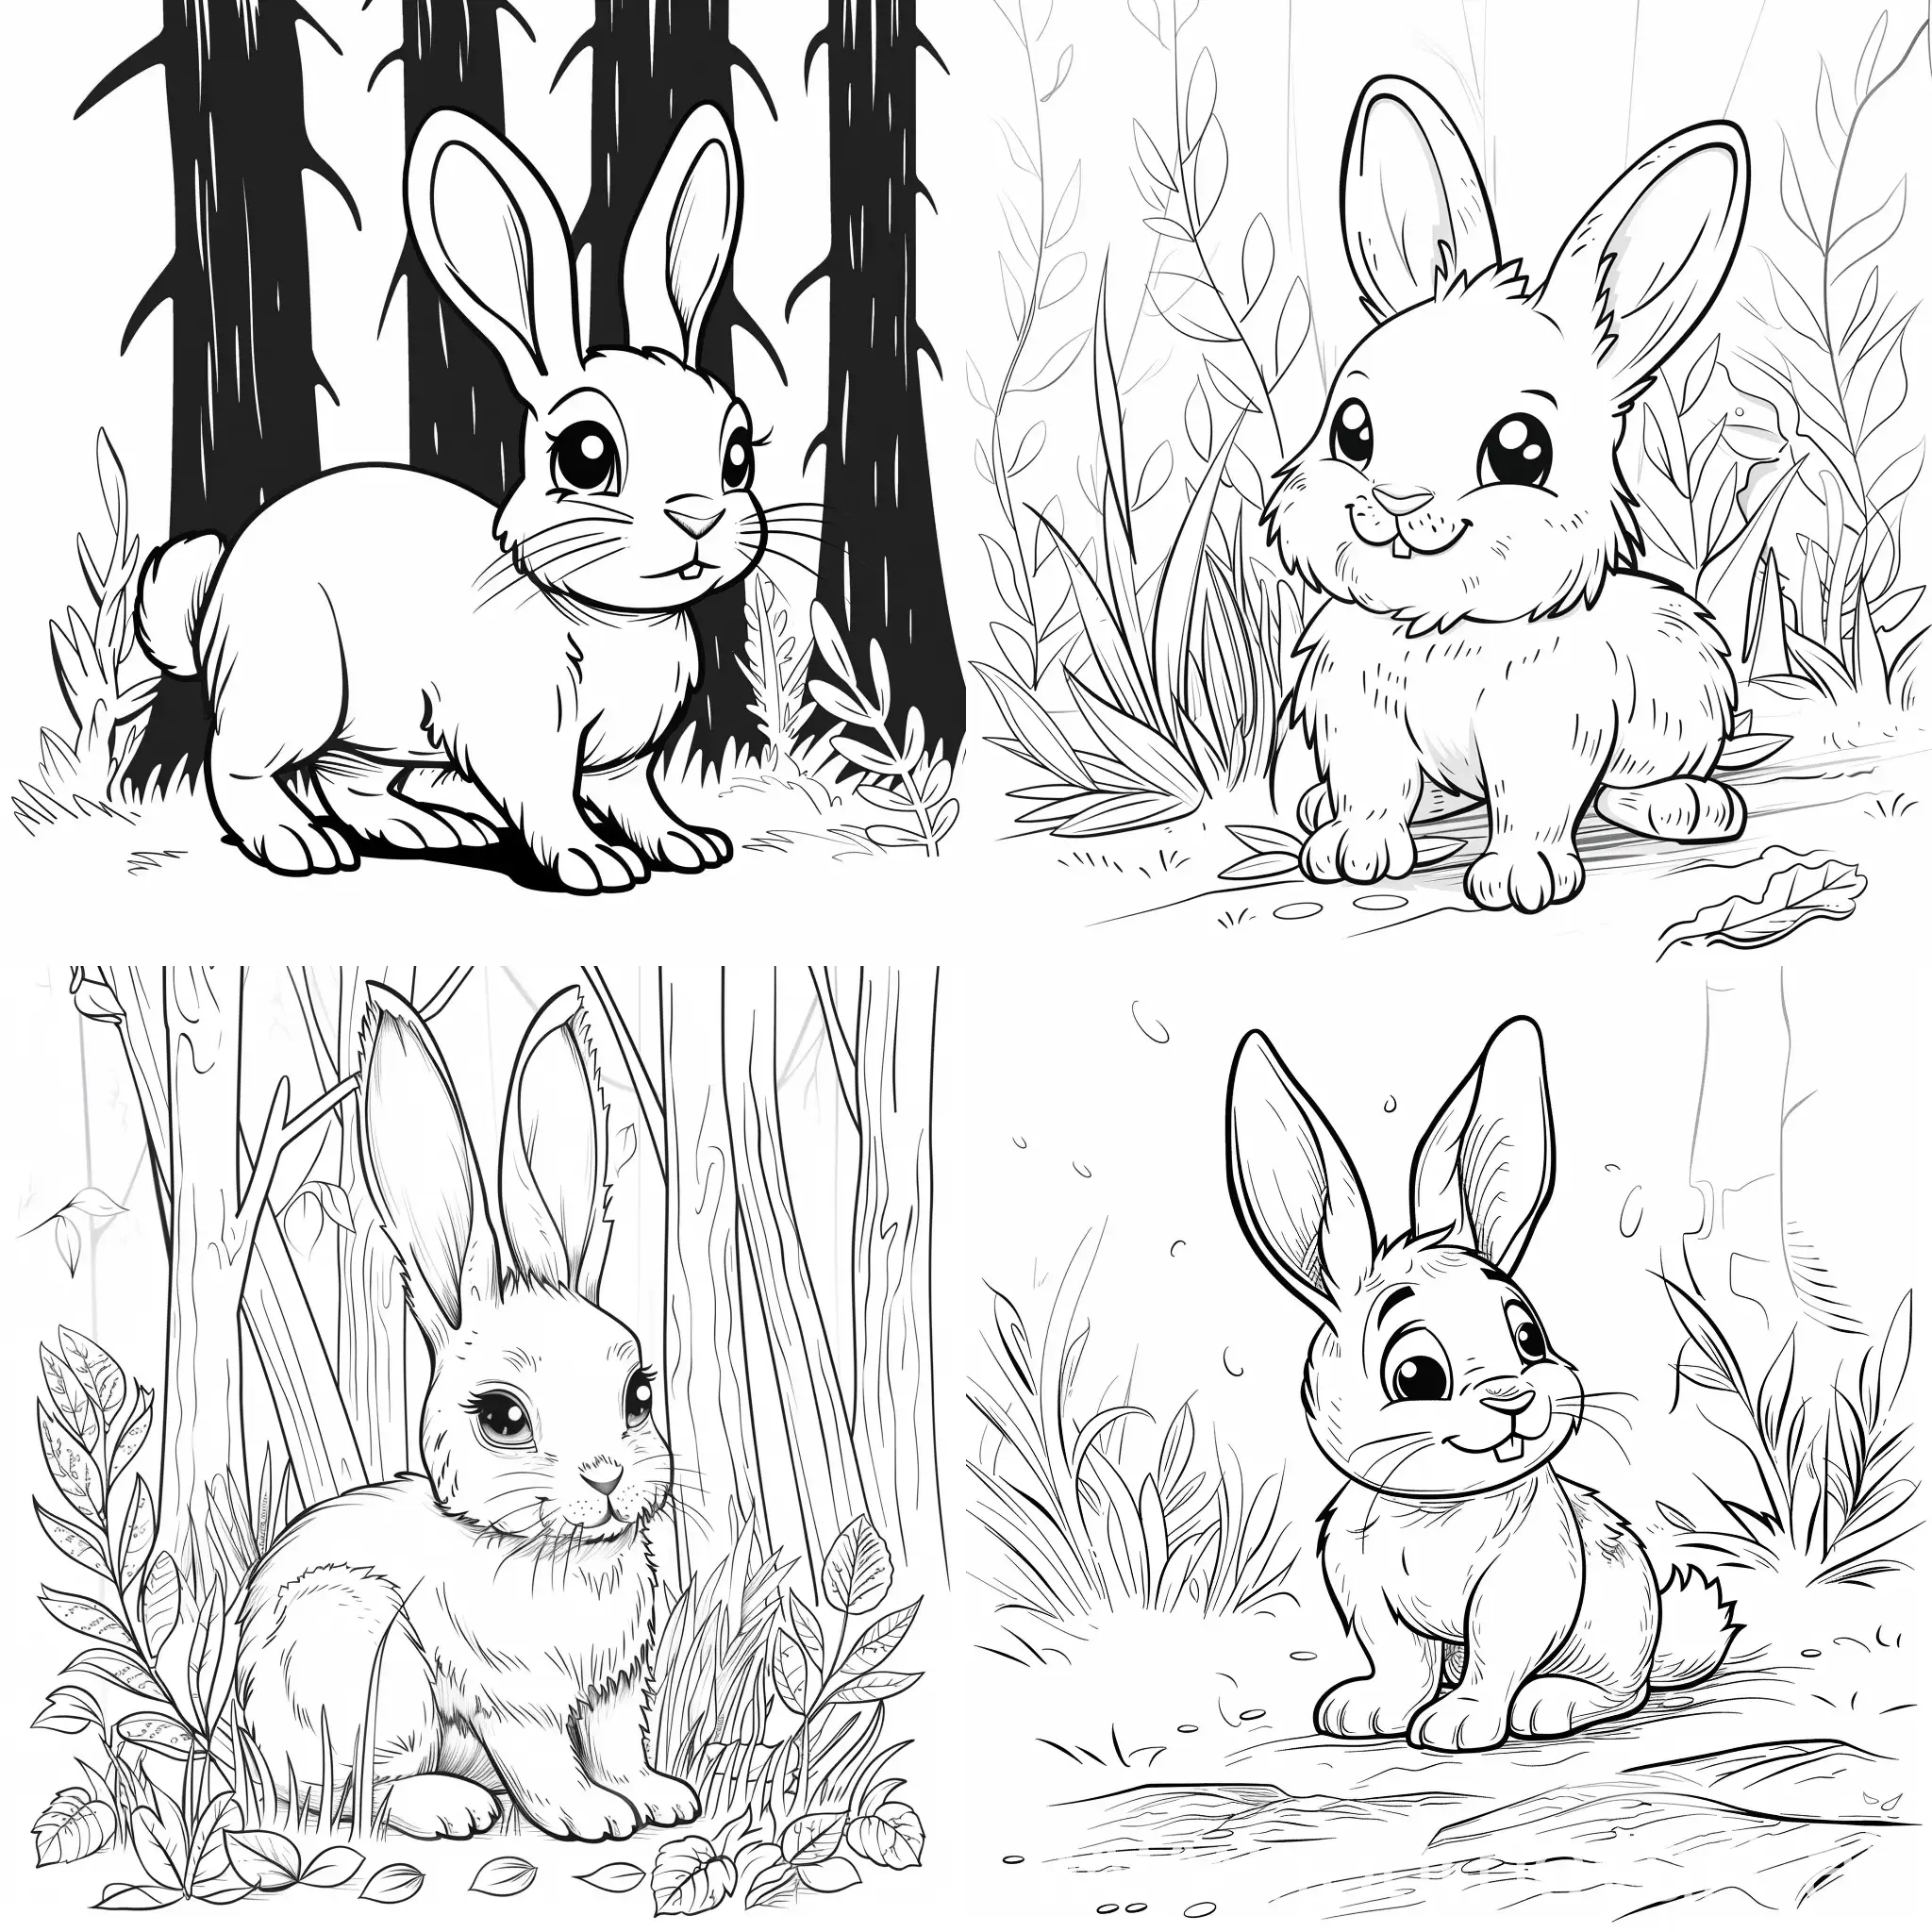 Forest-Adventure-Adorable-Black-and-White-Rabbit-Coloring-Page-for-Kids